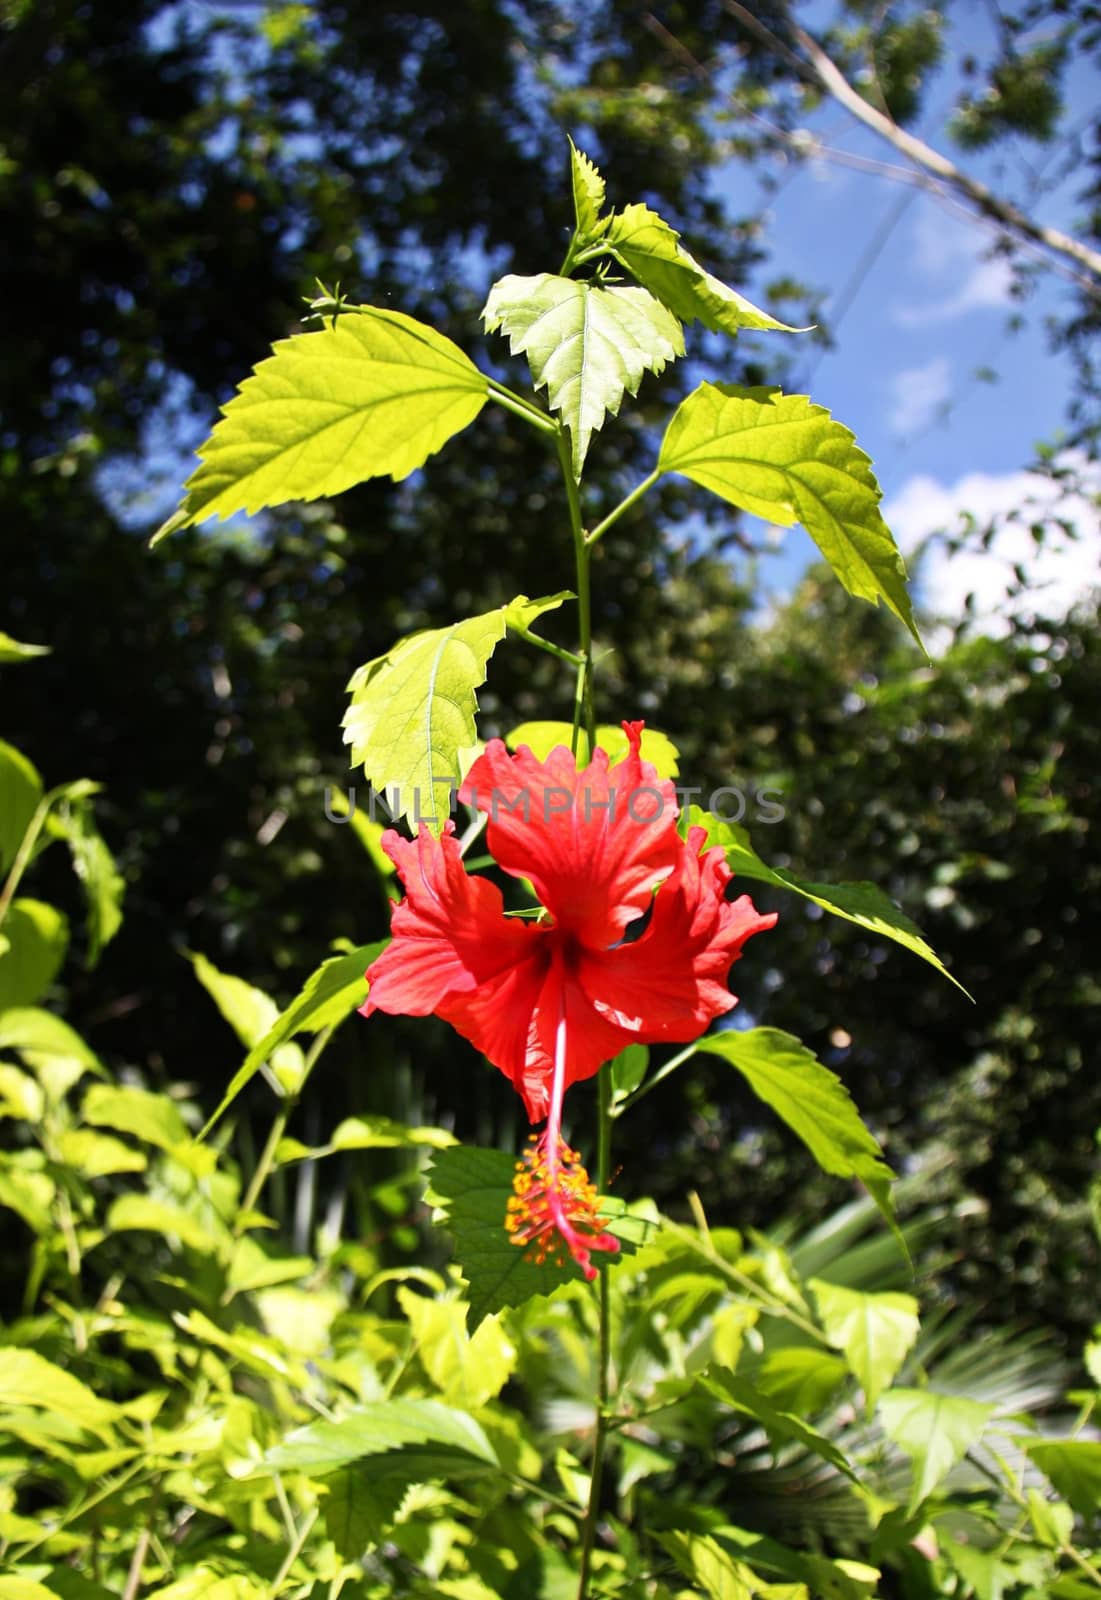 Red flower against the bright green leaves